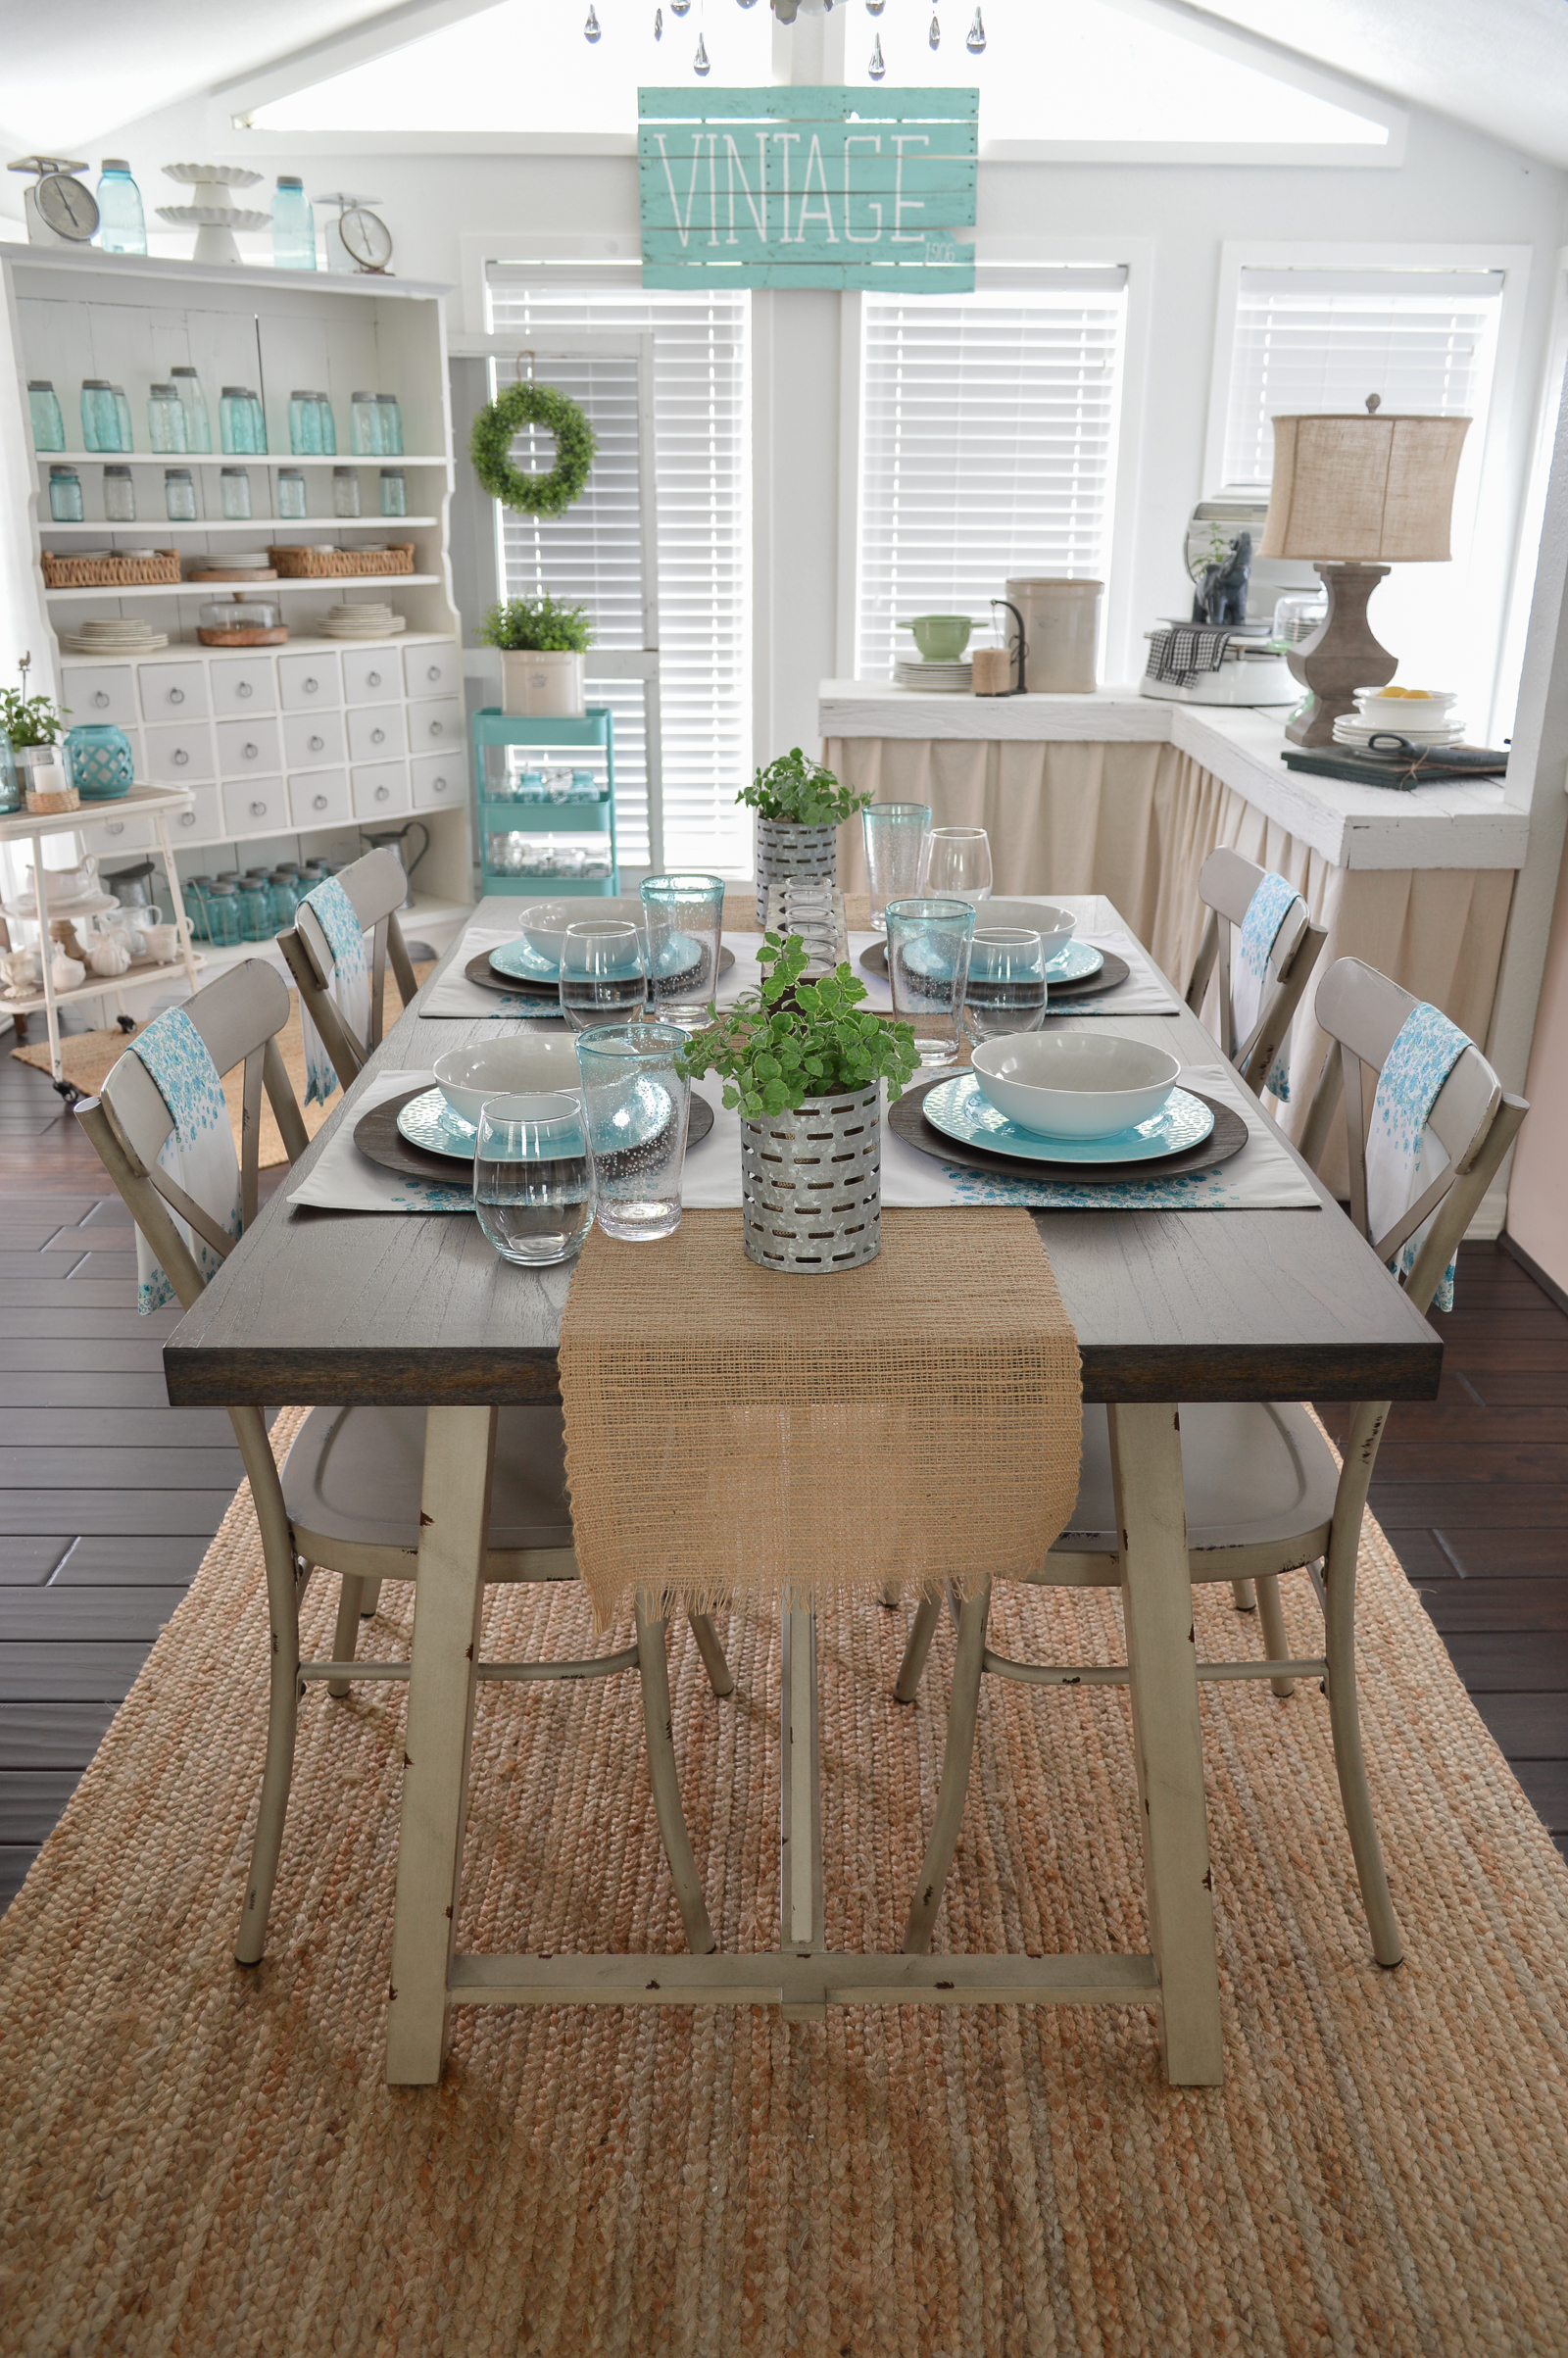 Farmhouse Style Decorating with Color | Easy ideas for adding color to neutral decor, featuring Better Homes & Gardens good, found at Walmart! Affordable cottage farm house dining table #sponsored 